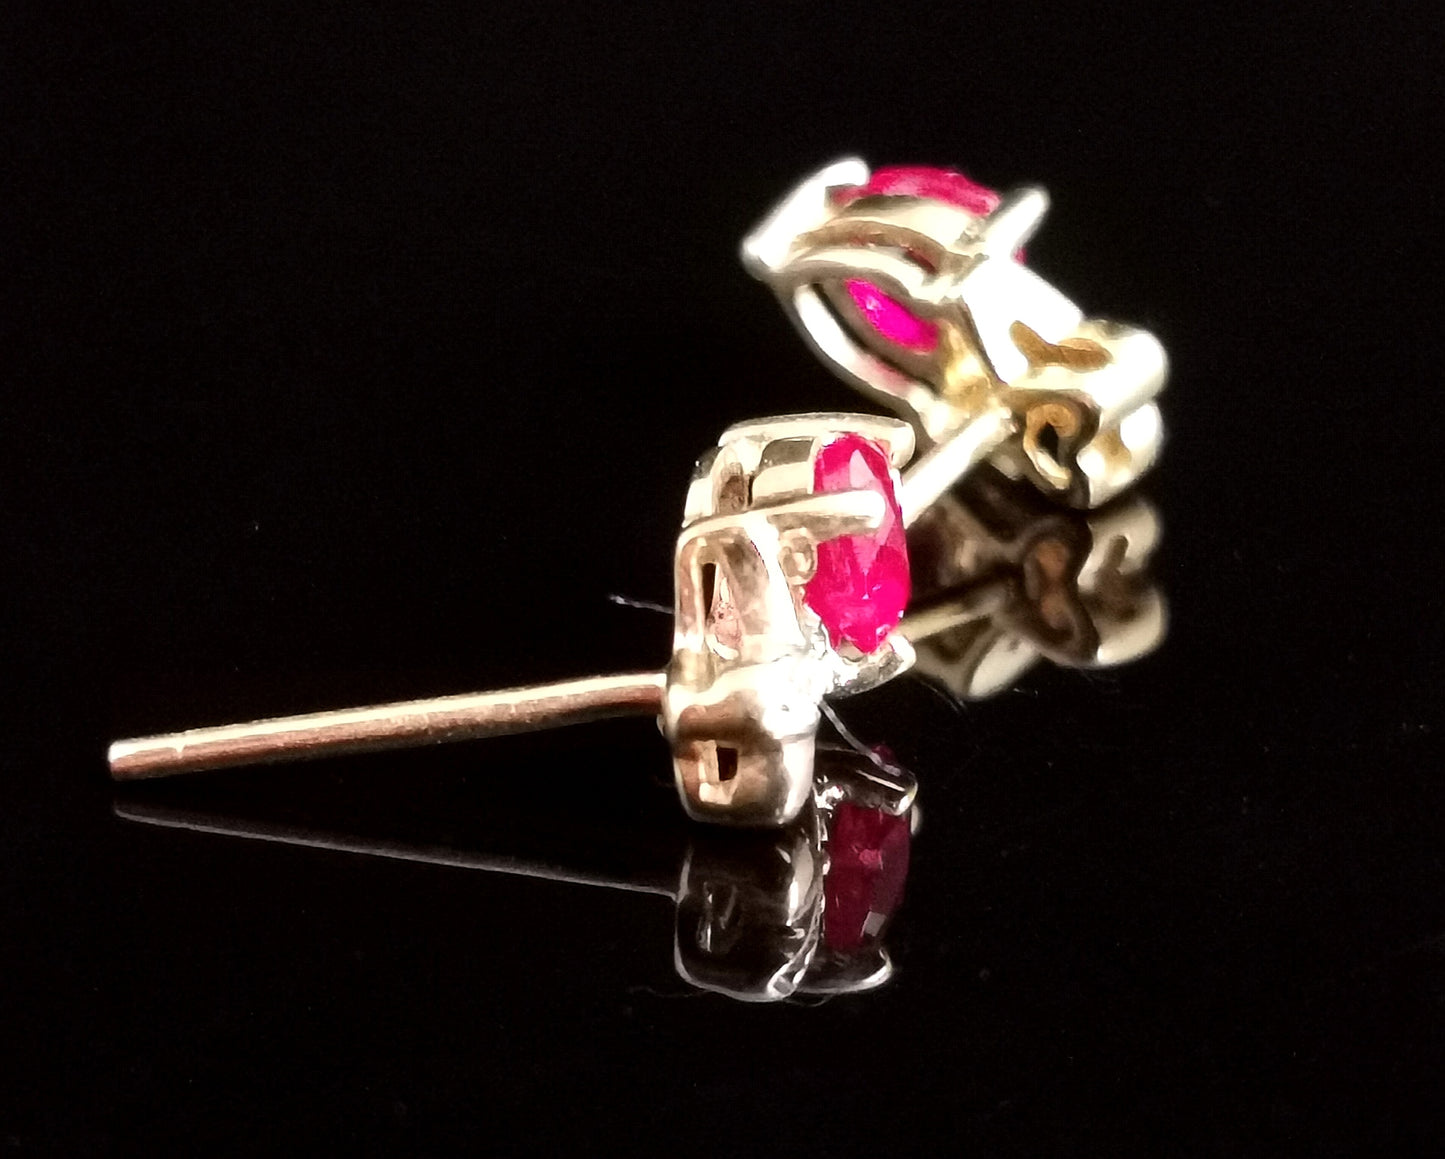 Vintage Synthetic Ruby and Diamond Heart earrings, studs, 9ct gold